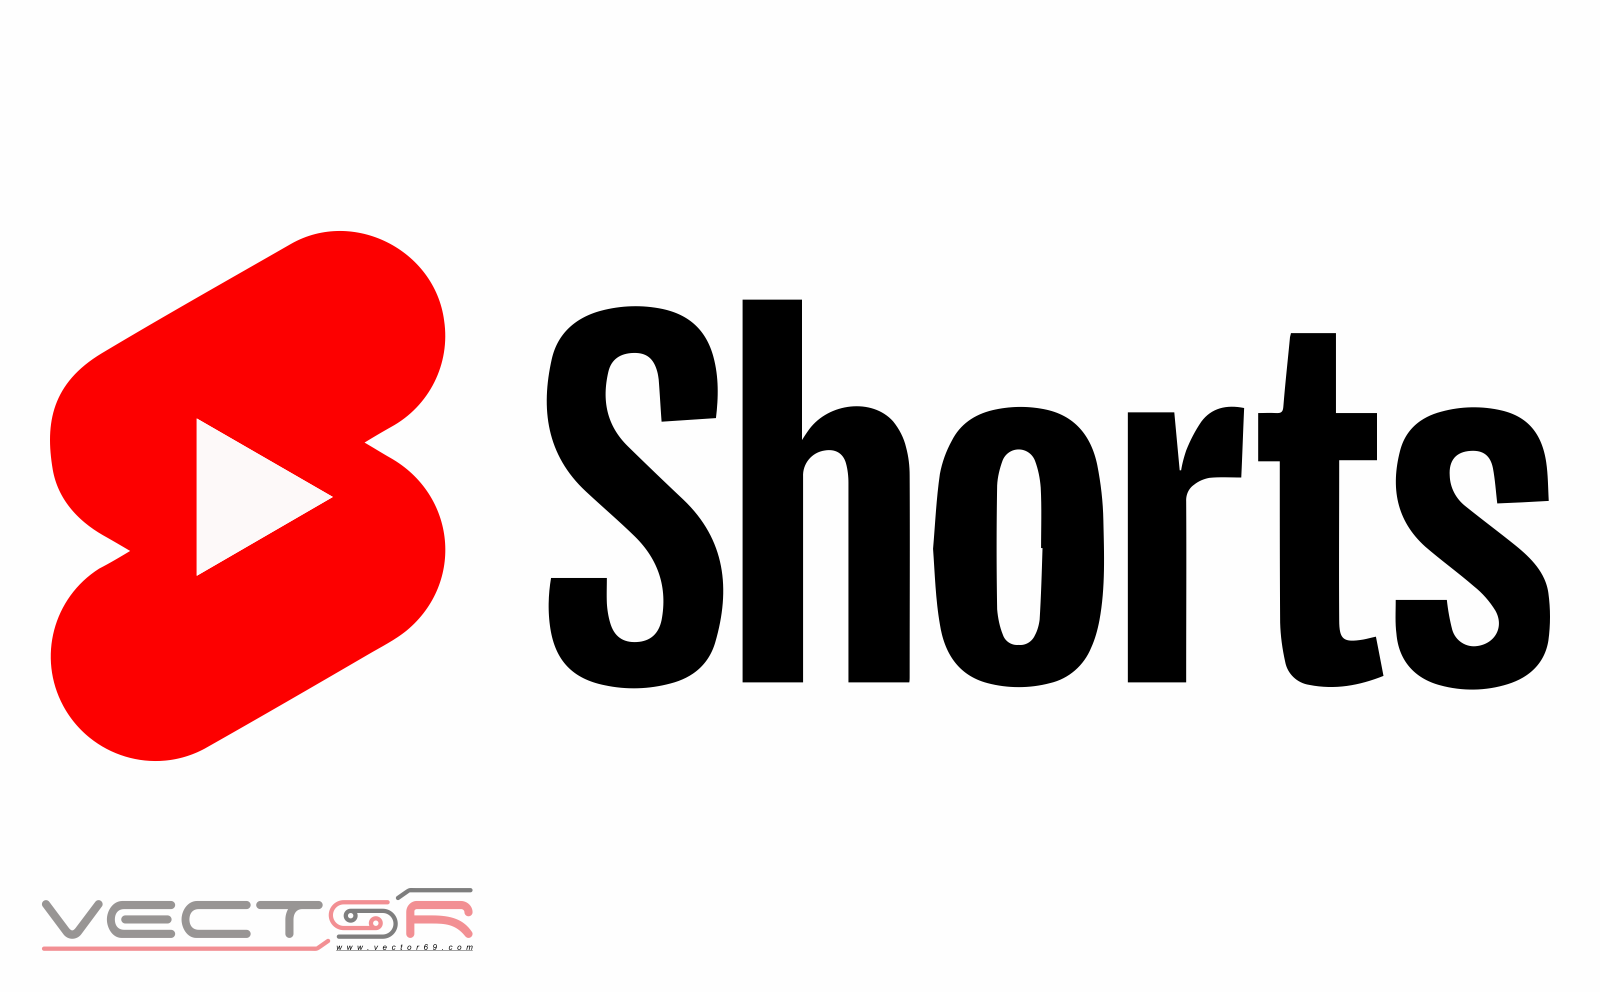 Youtube Shorts Logo - Download Transparent Images, Portable Network Graphics (.PNG)